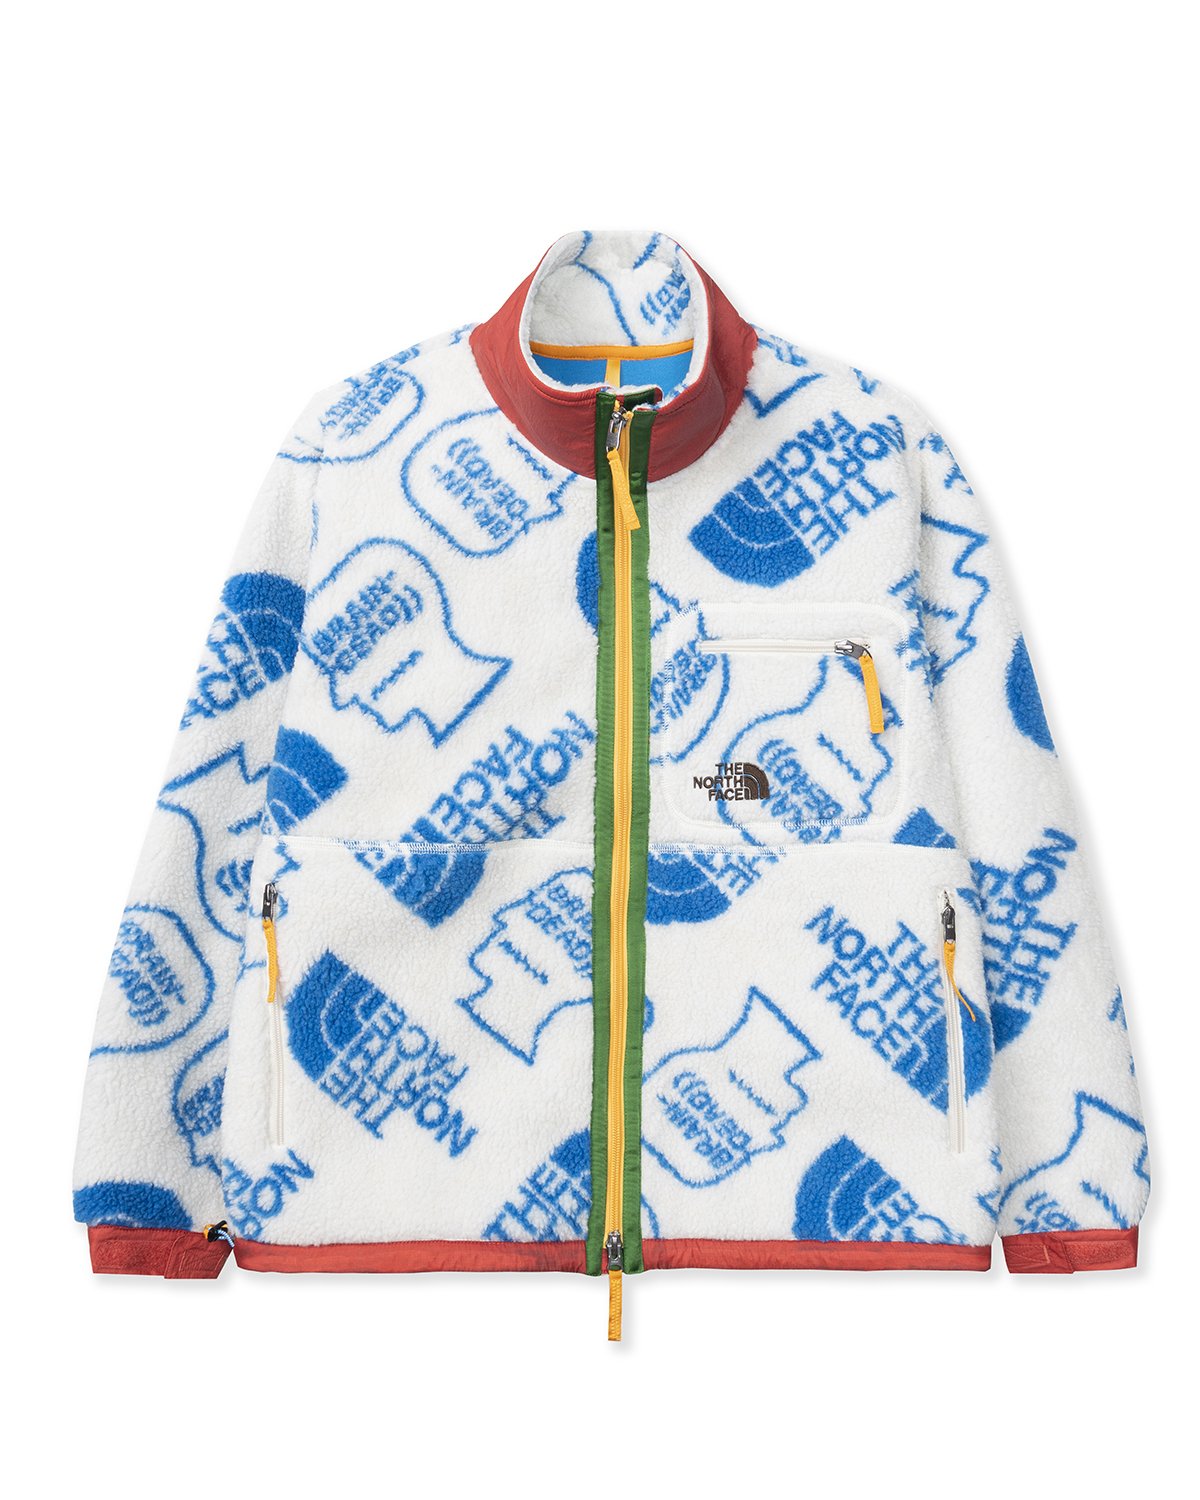 The North Face x Brain Dead Extreme Pile Full Zip Fleece White